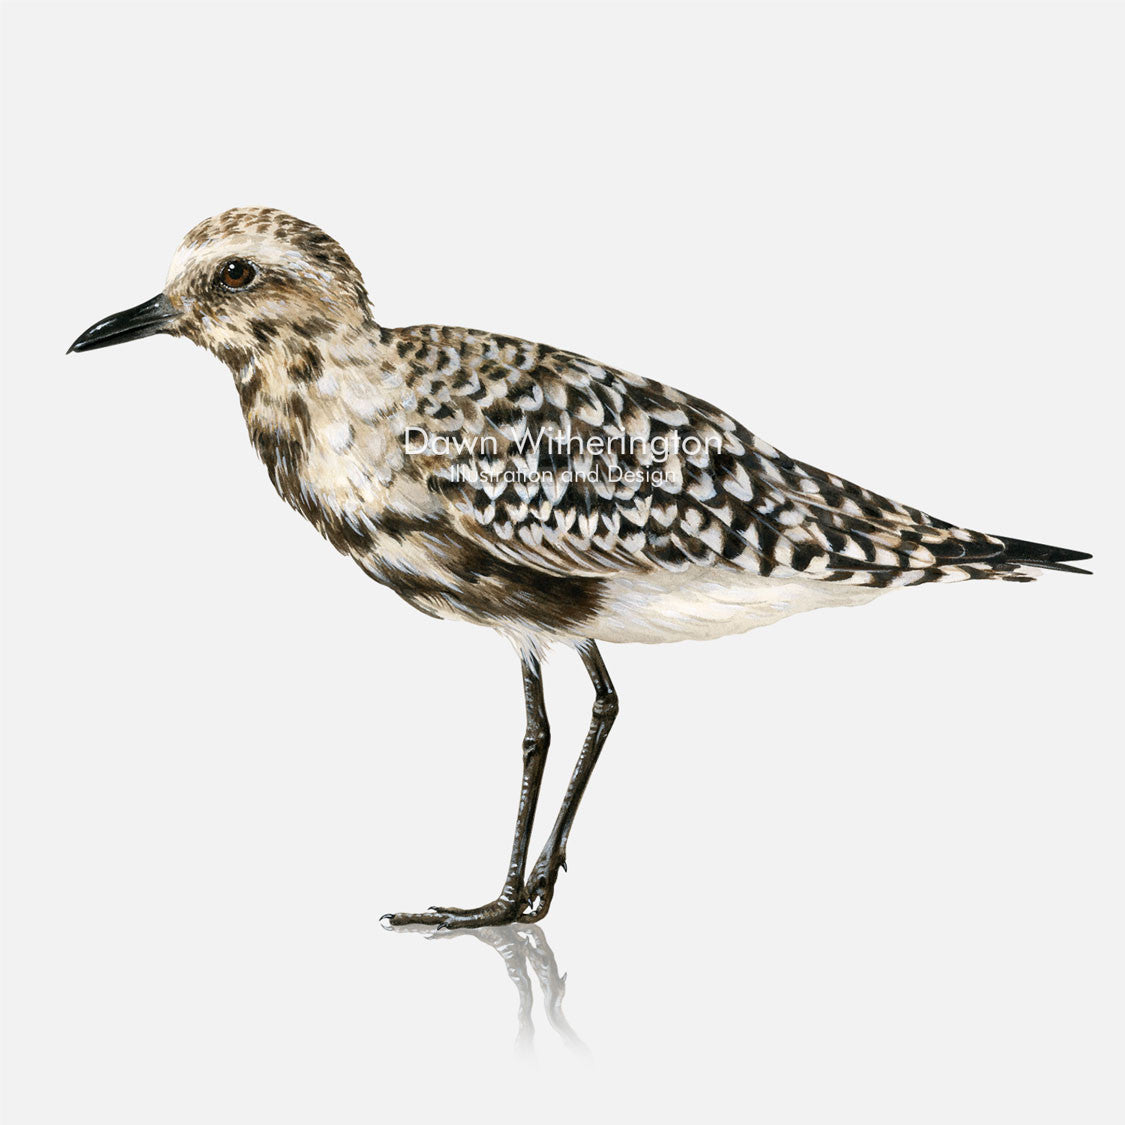 This beautiful illustration of a black-bellied plover, Pluvialis squatarola, with vestiges of breeding plumage, is biologically accurate in detail.